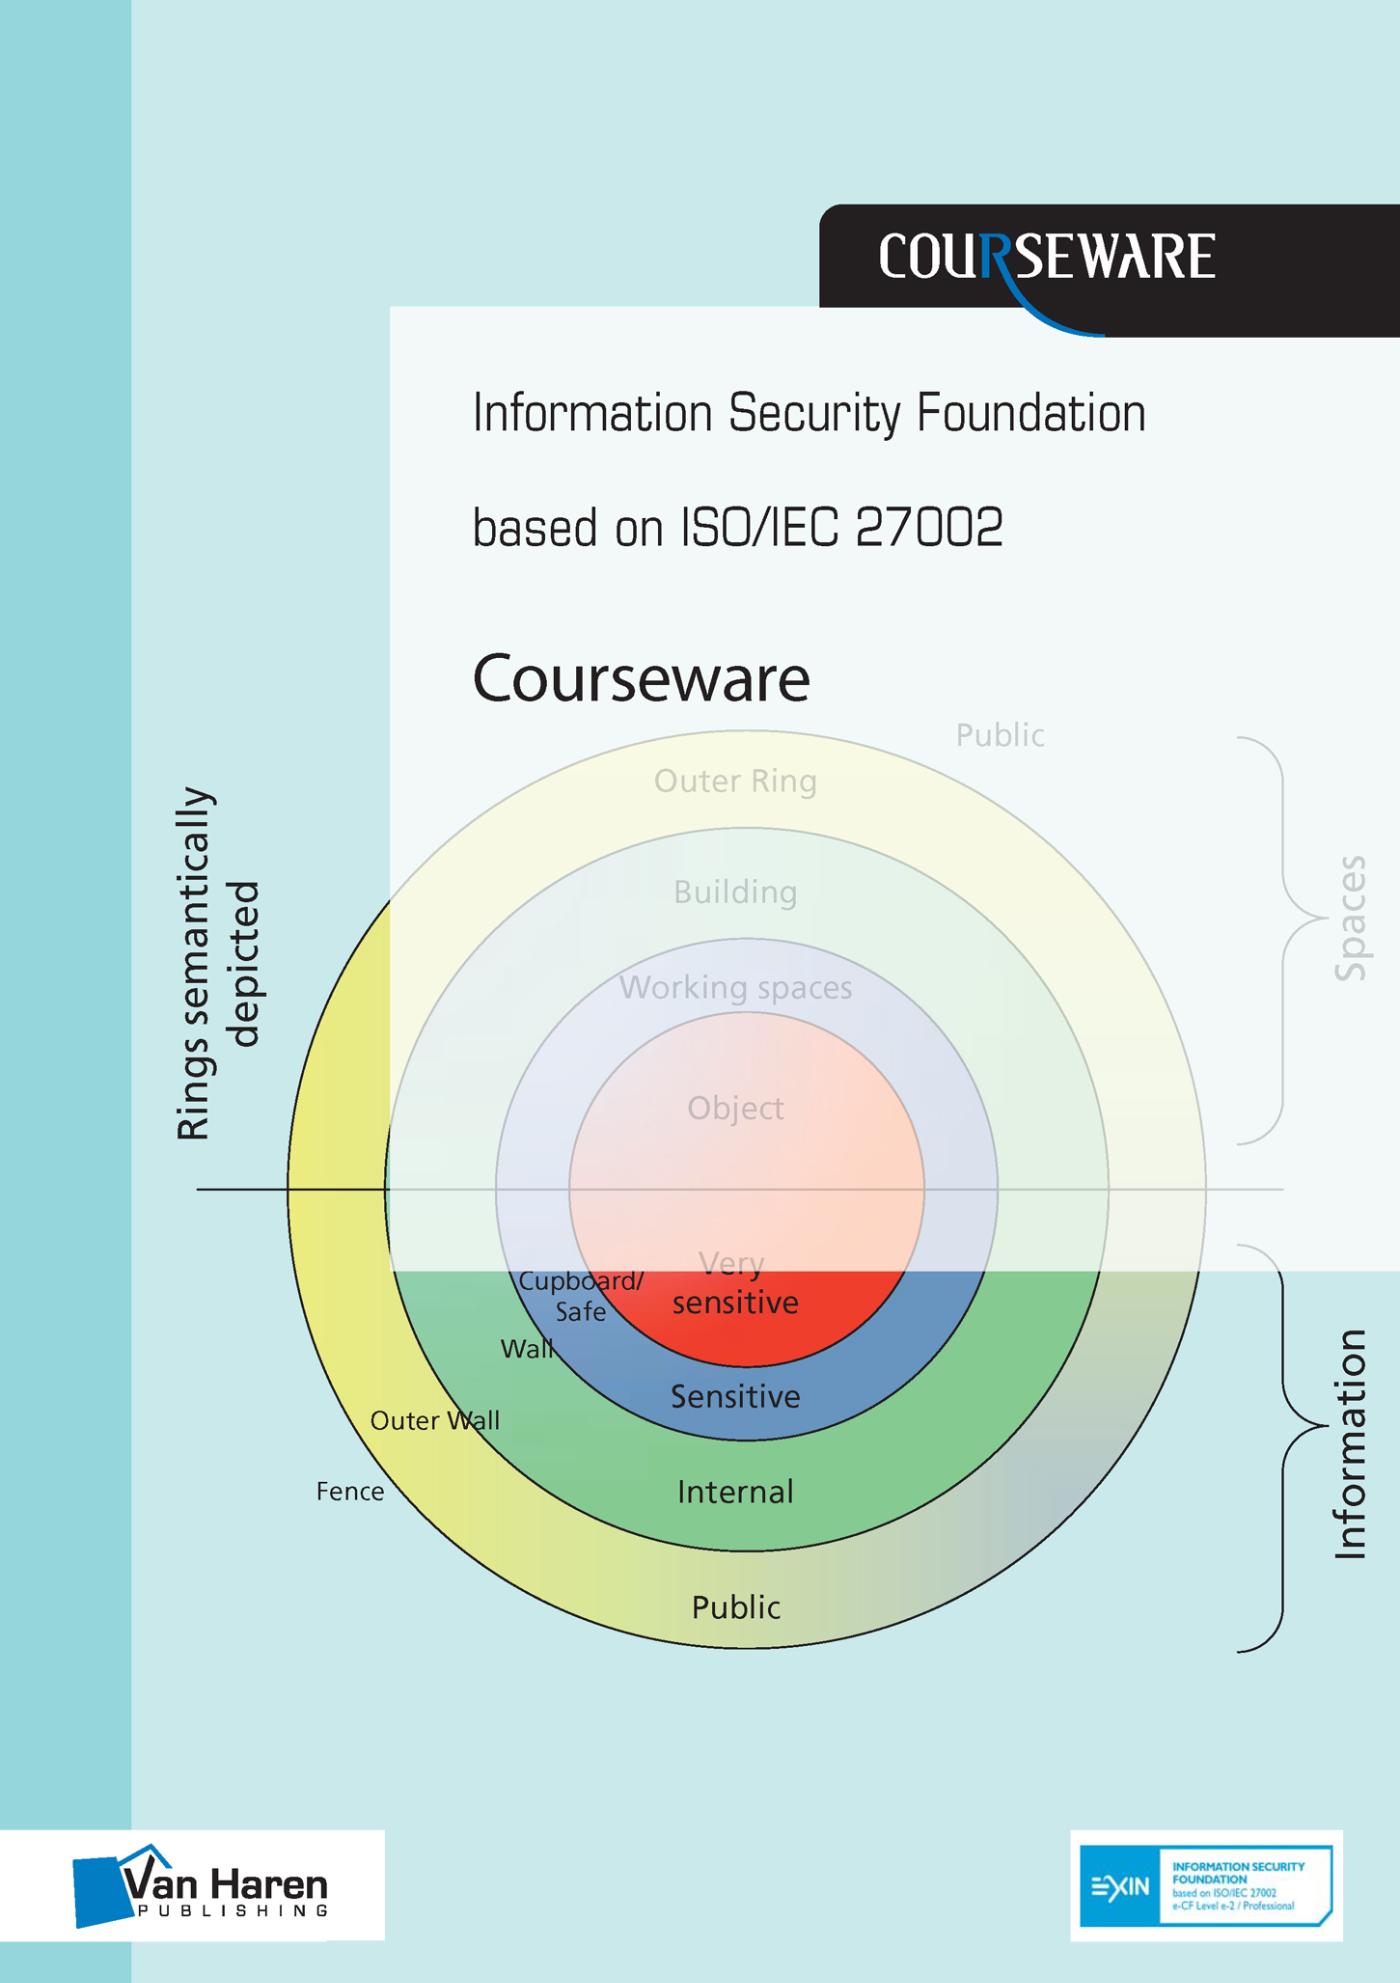 Information security foundation based on iso/iec 27002 courseware (Ebook)